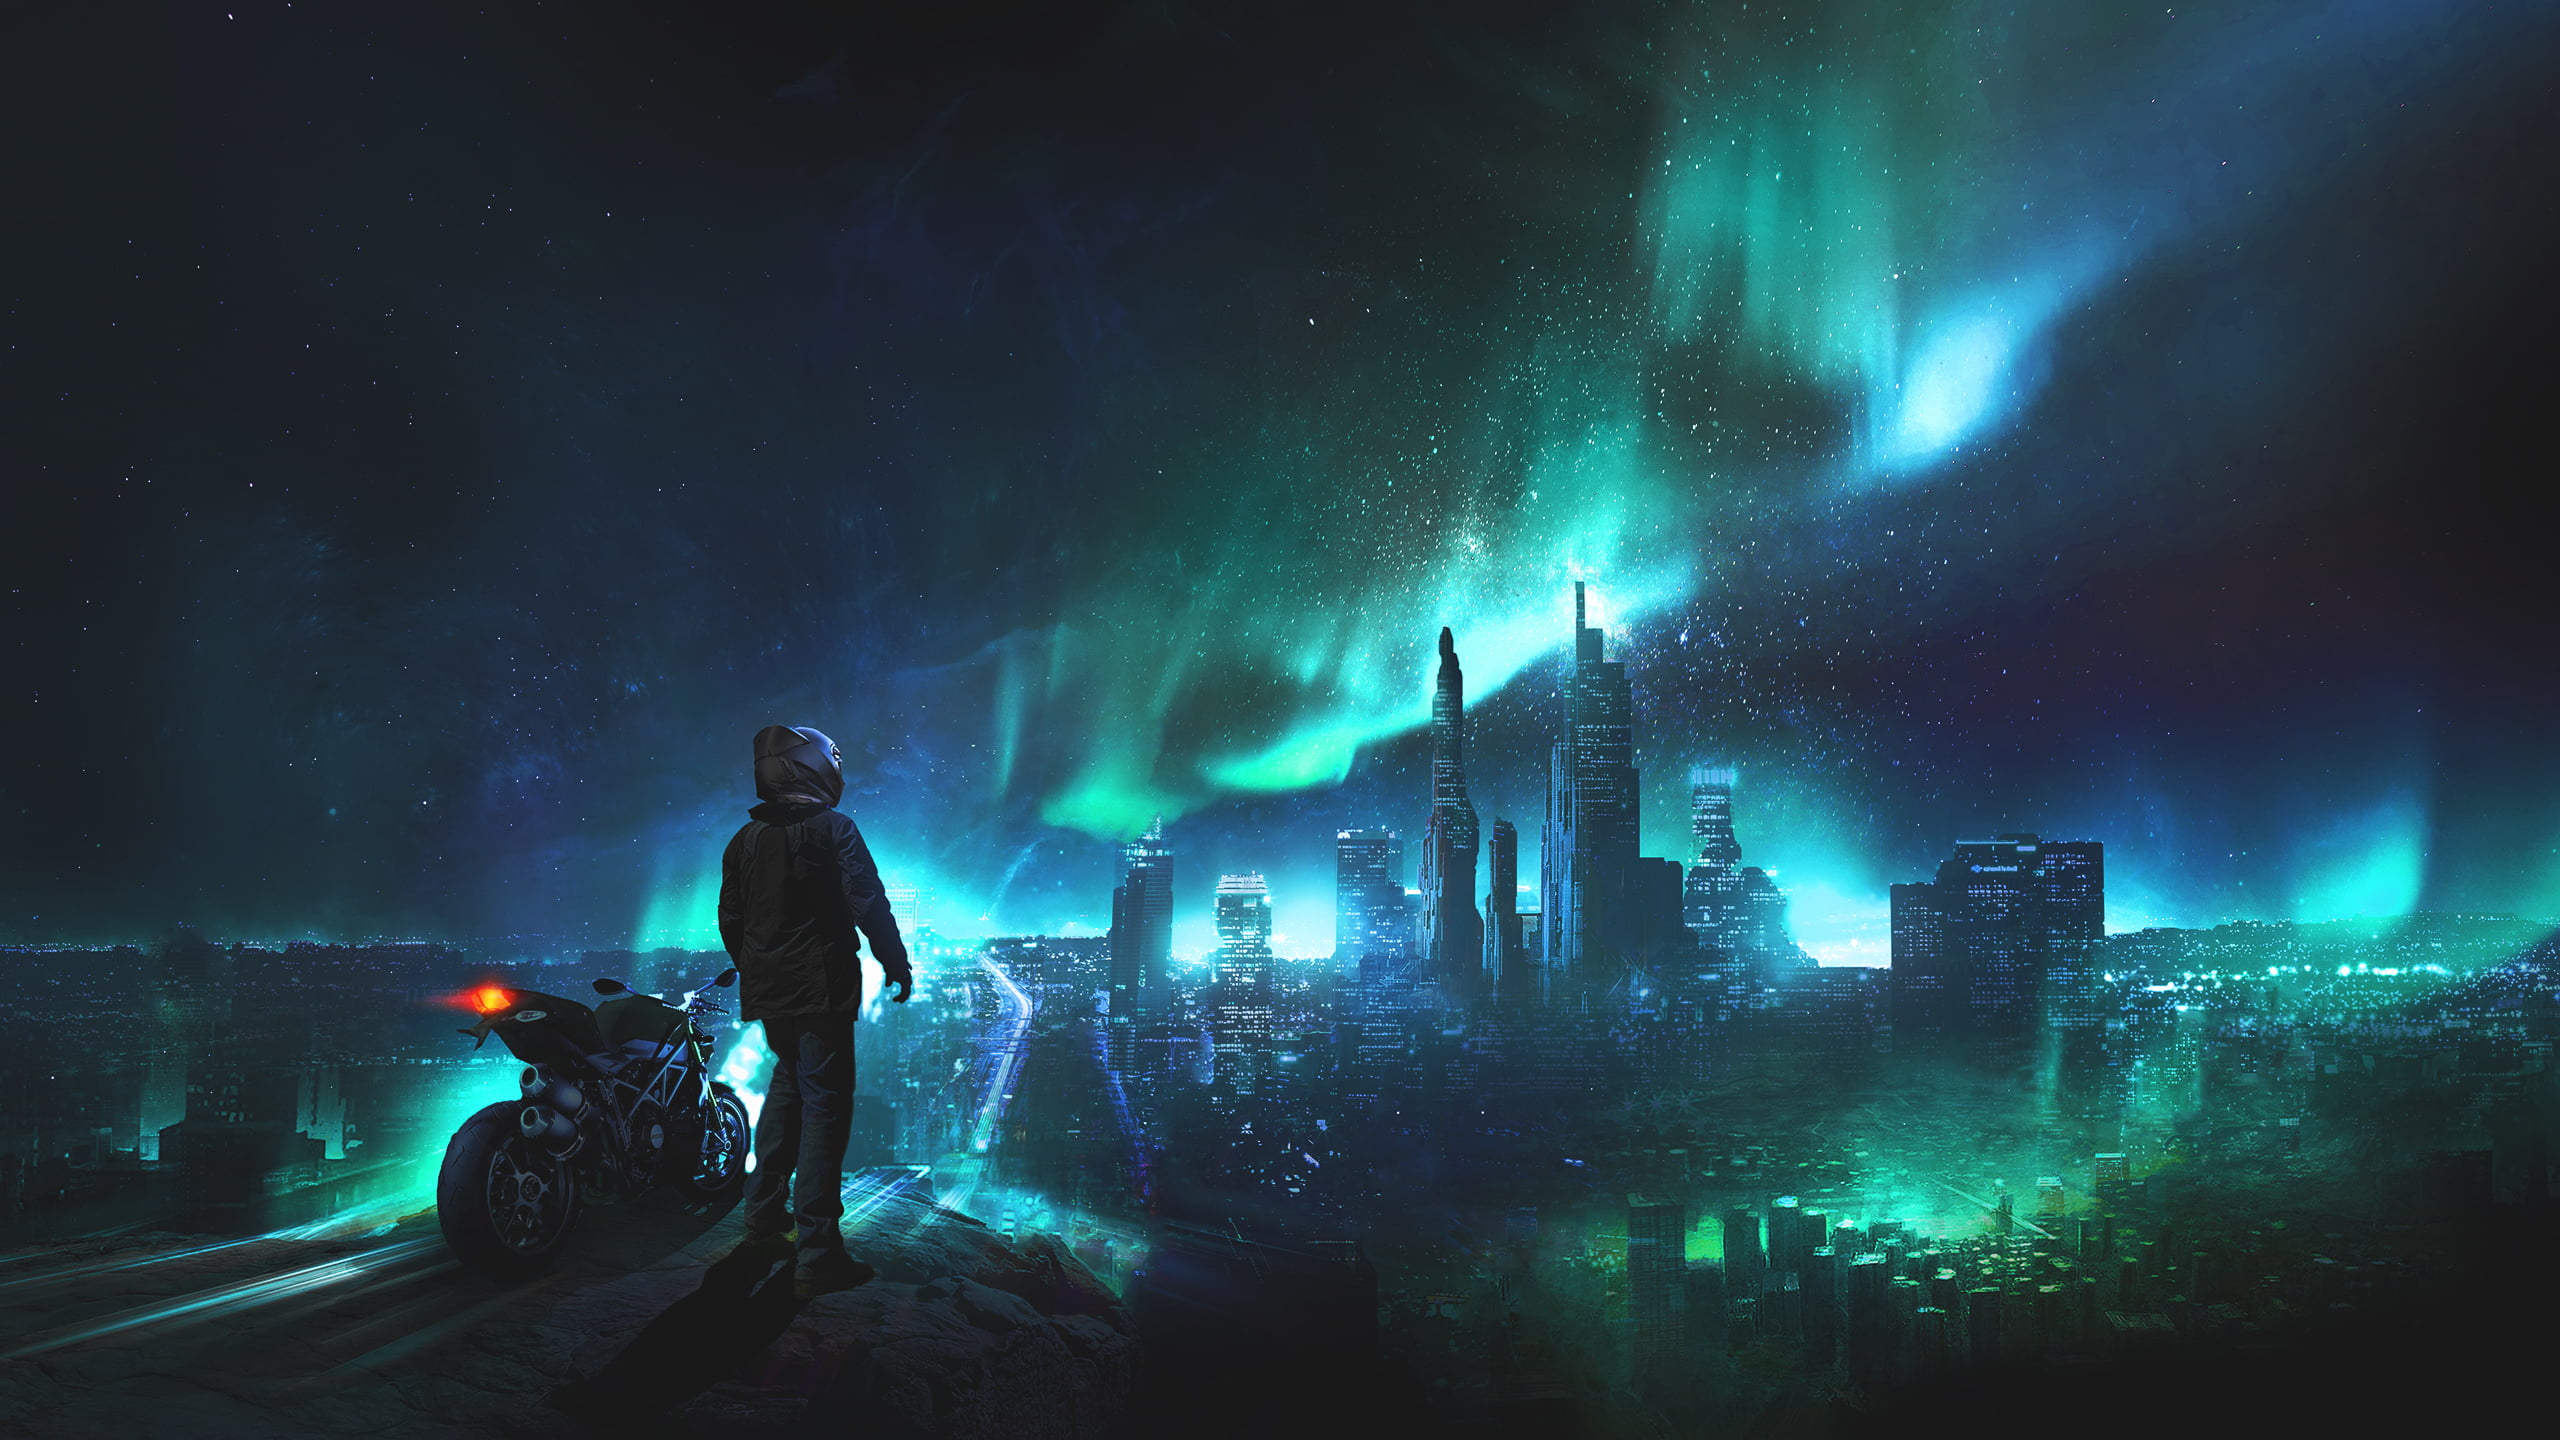 black hooded jacket, man with motorcycle watching the northern lights above the city